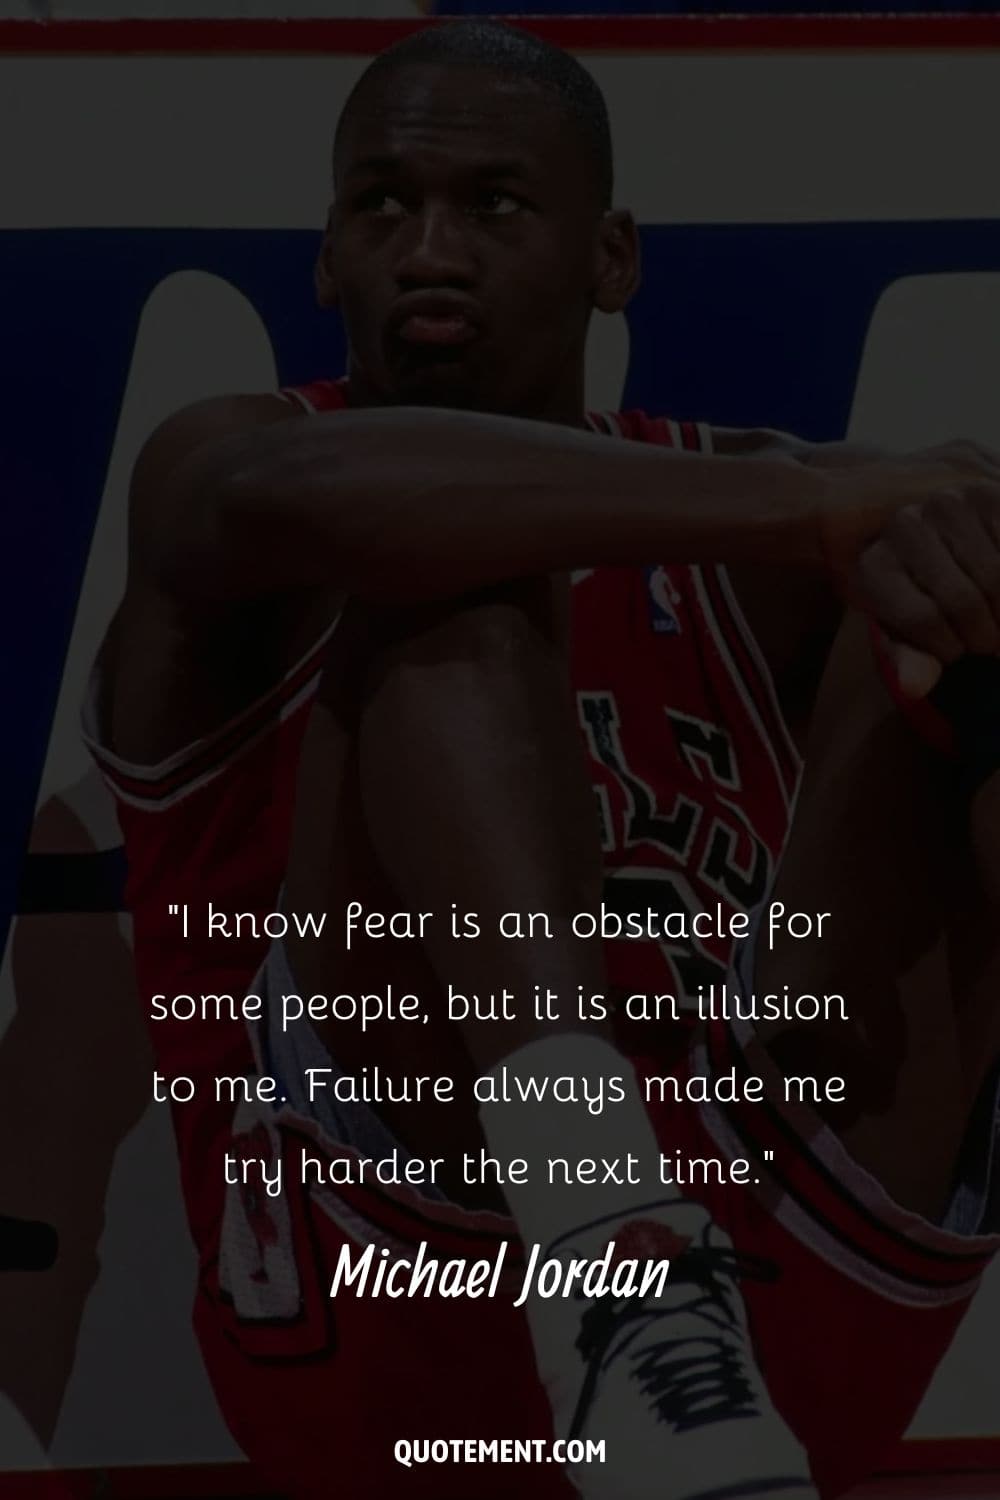 Michael Jordan on the court with his arms on his knees representing Michael Jordan quote on failure